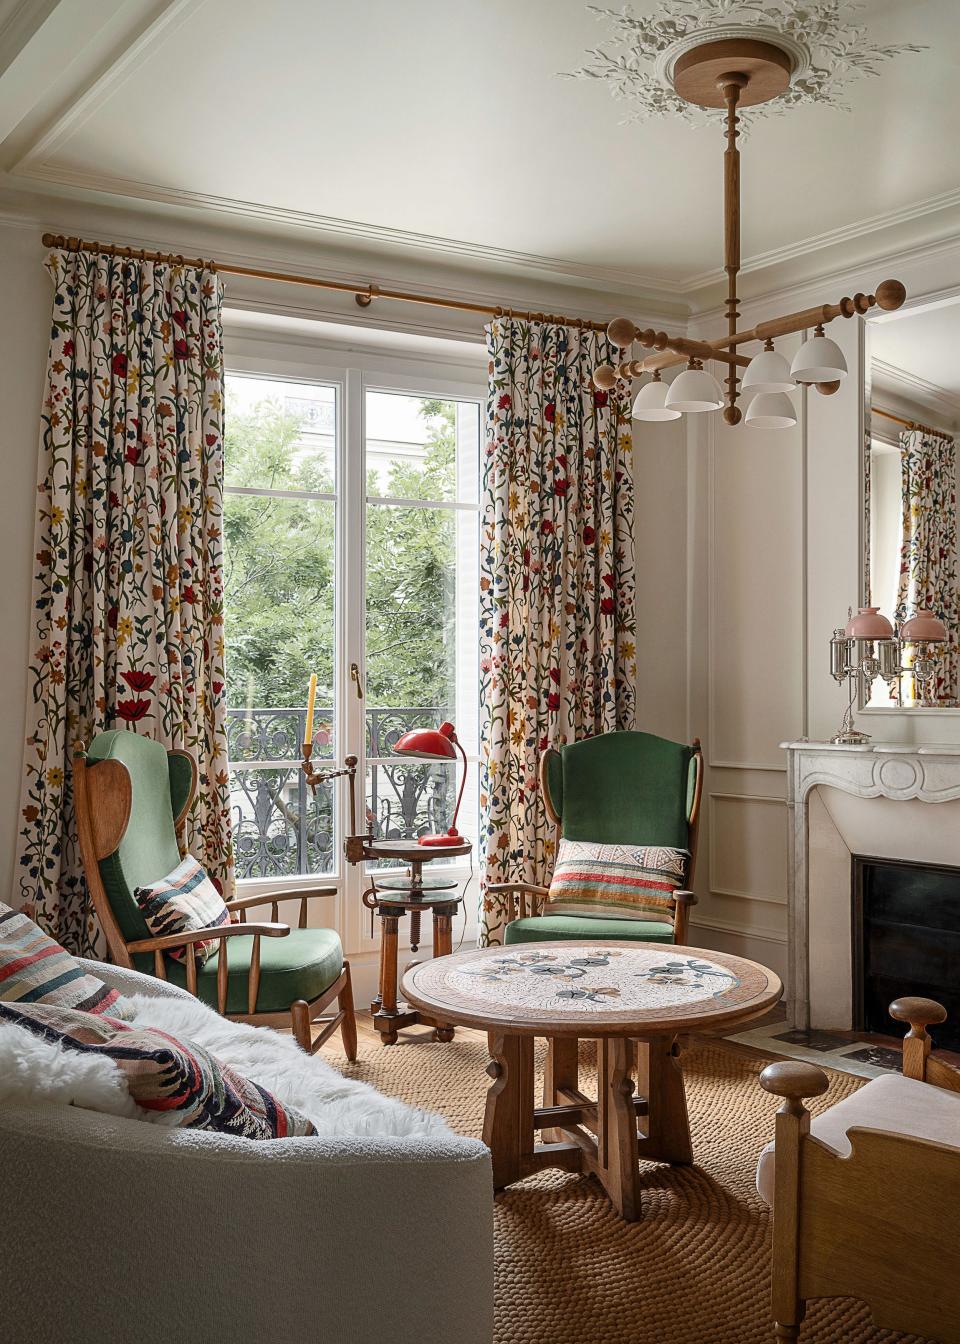 In the living room of her Paris apartment, designer Jessica Helgerson mixes vintage French chairs, a Guillerme et Chambron cocktail table, a chandelier from her Roll & Hill collection, and an antique lacemaker’s table.